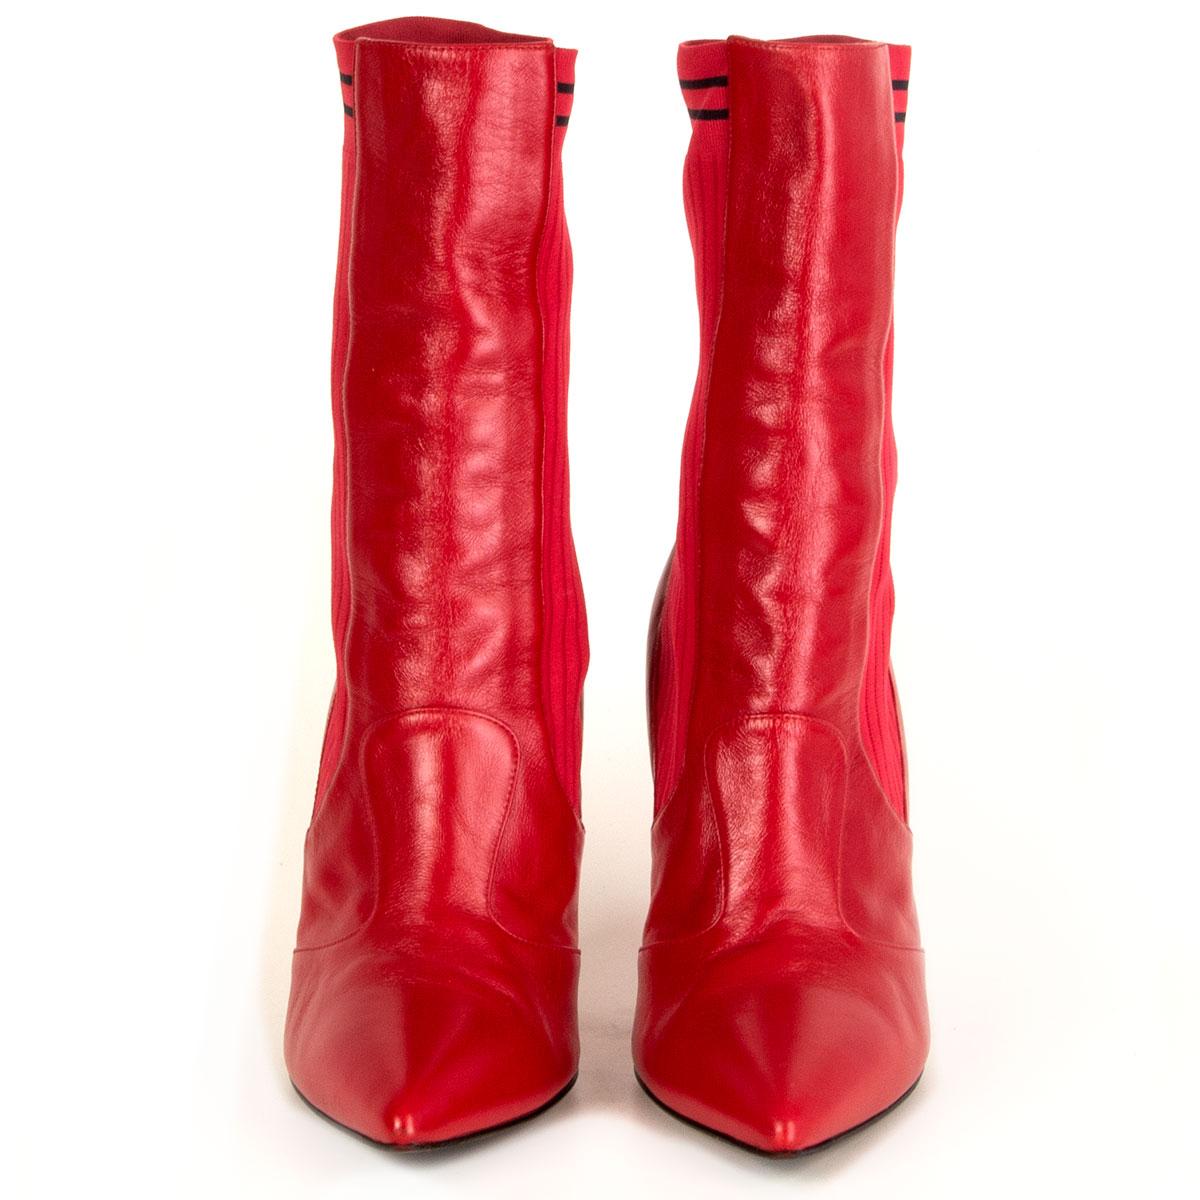 100% authentic Fendi Sock ankle-boots in cherry red calfskin with stretch fabric inserts. The tapered shape is infused with sporty details. The heel has a slender geometric shape. Have been worn and are in excellent condition.